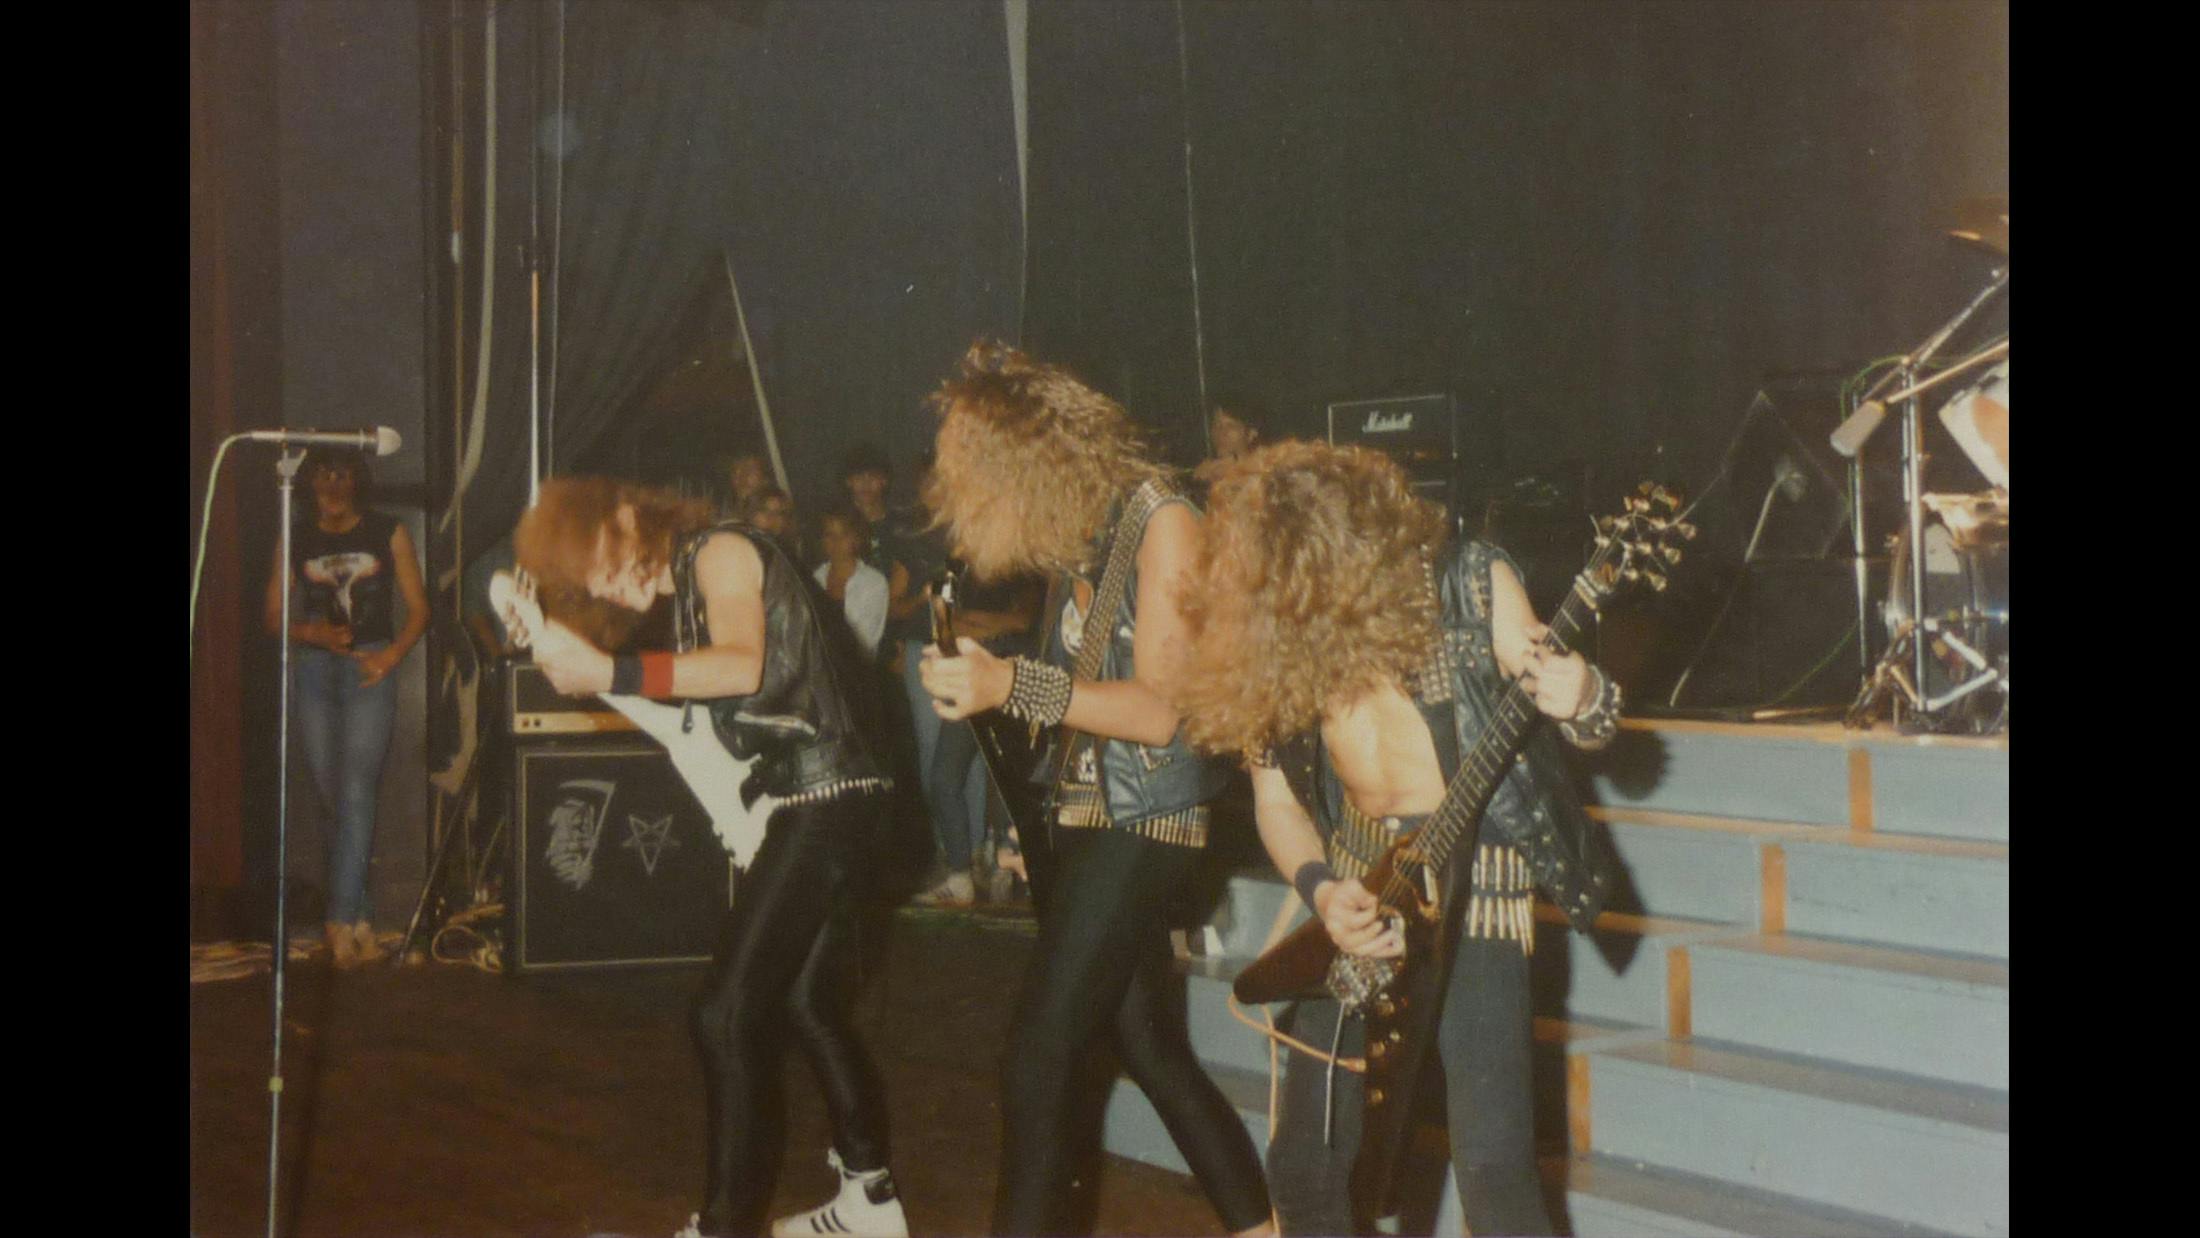 This is the last gig with our first drummer Tommy. The show was with Helloween in the city of Speyer in 1986. It was weird for us to know he would leave the band, but then we saw the Spinal Tap movie...